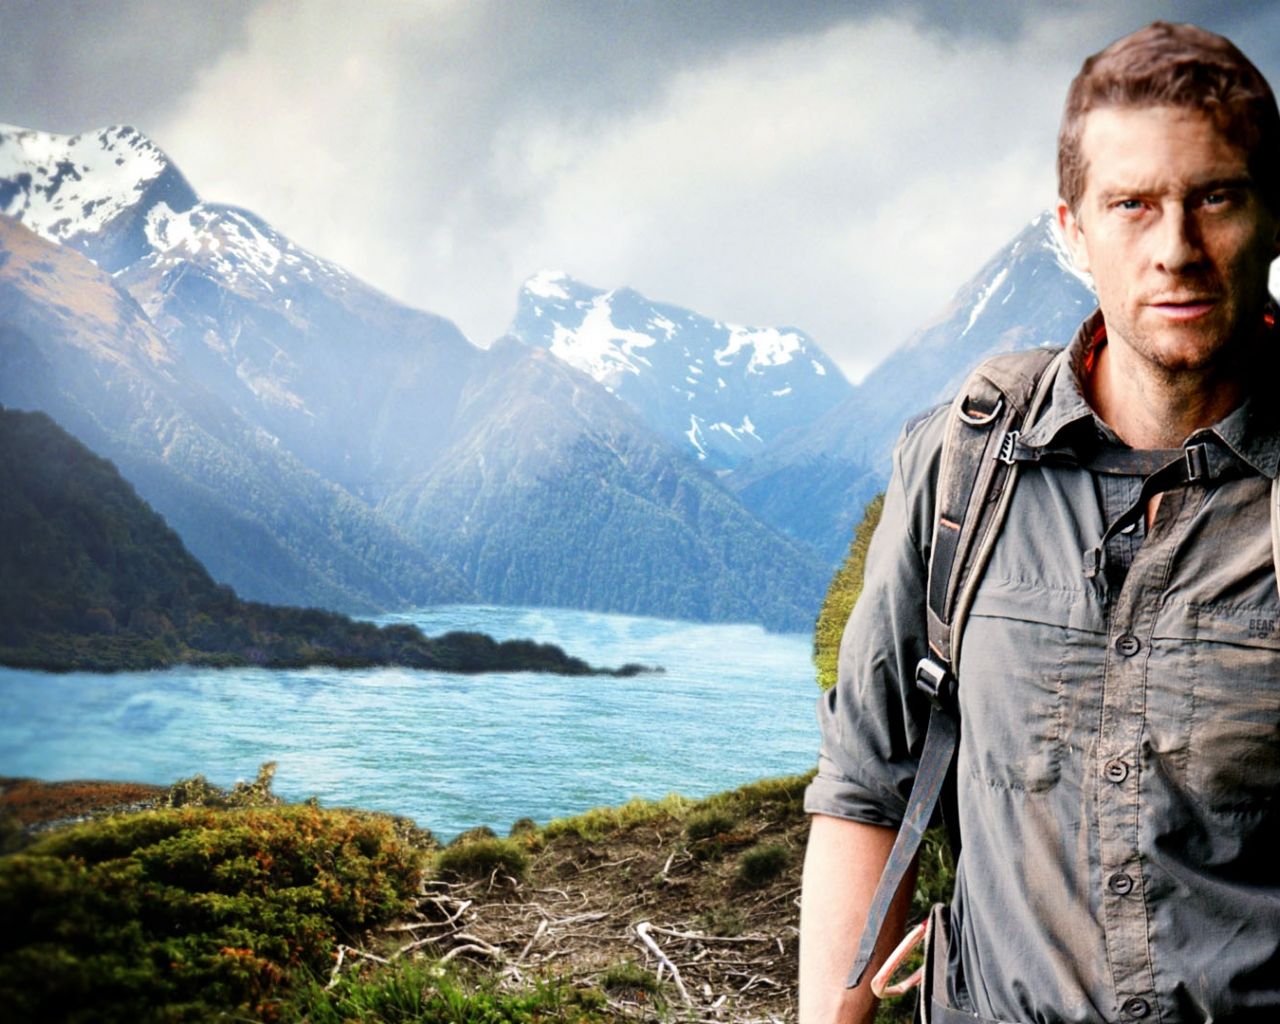 Running Wild With Bear Grylls Wallpapers